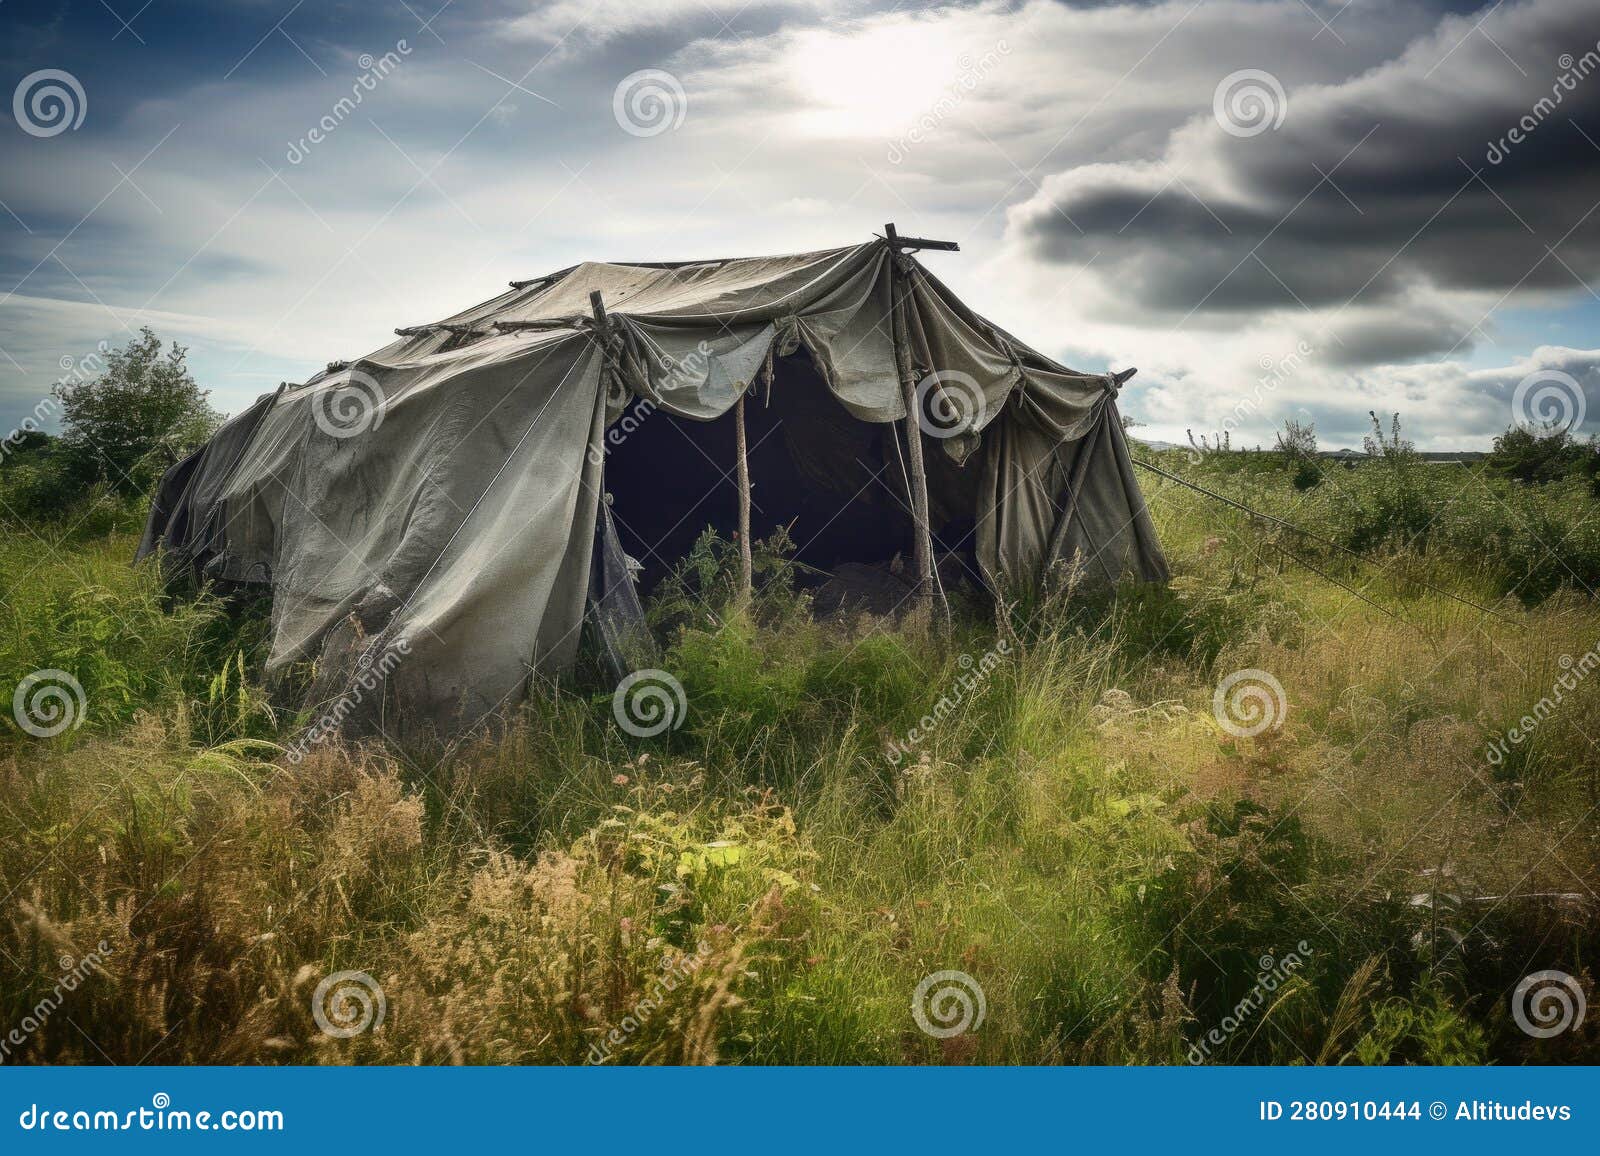 Shelter of Old Military Tent, with Fading and Tattered Canvas, on